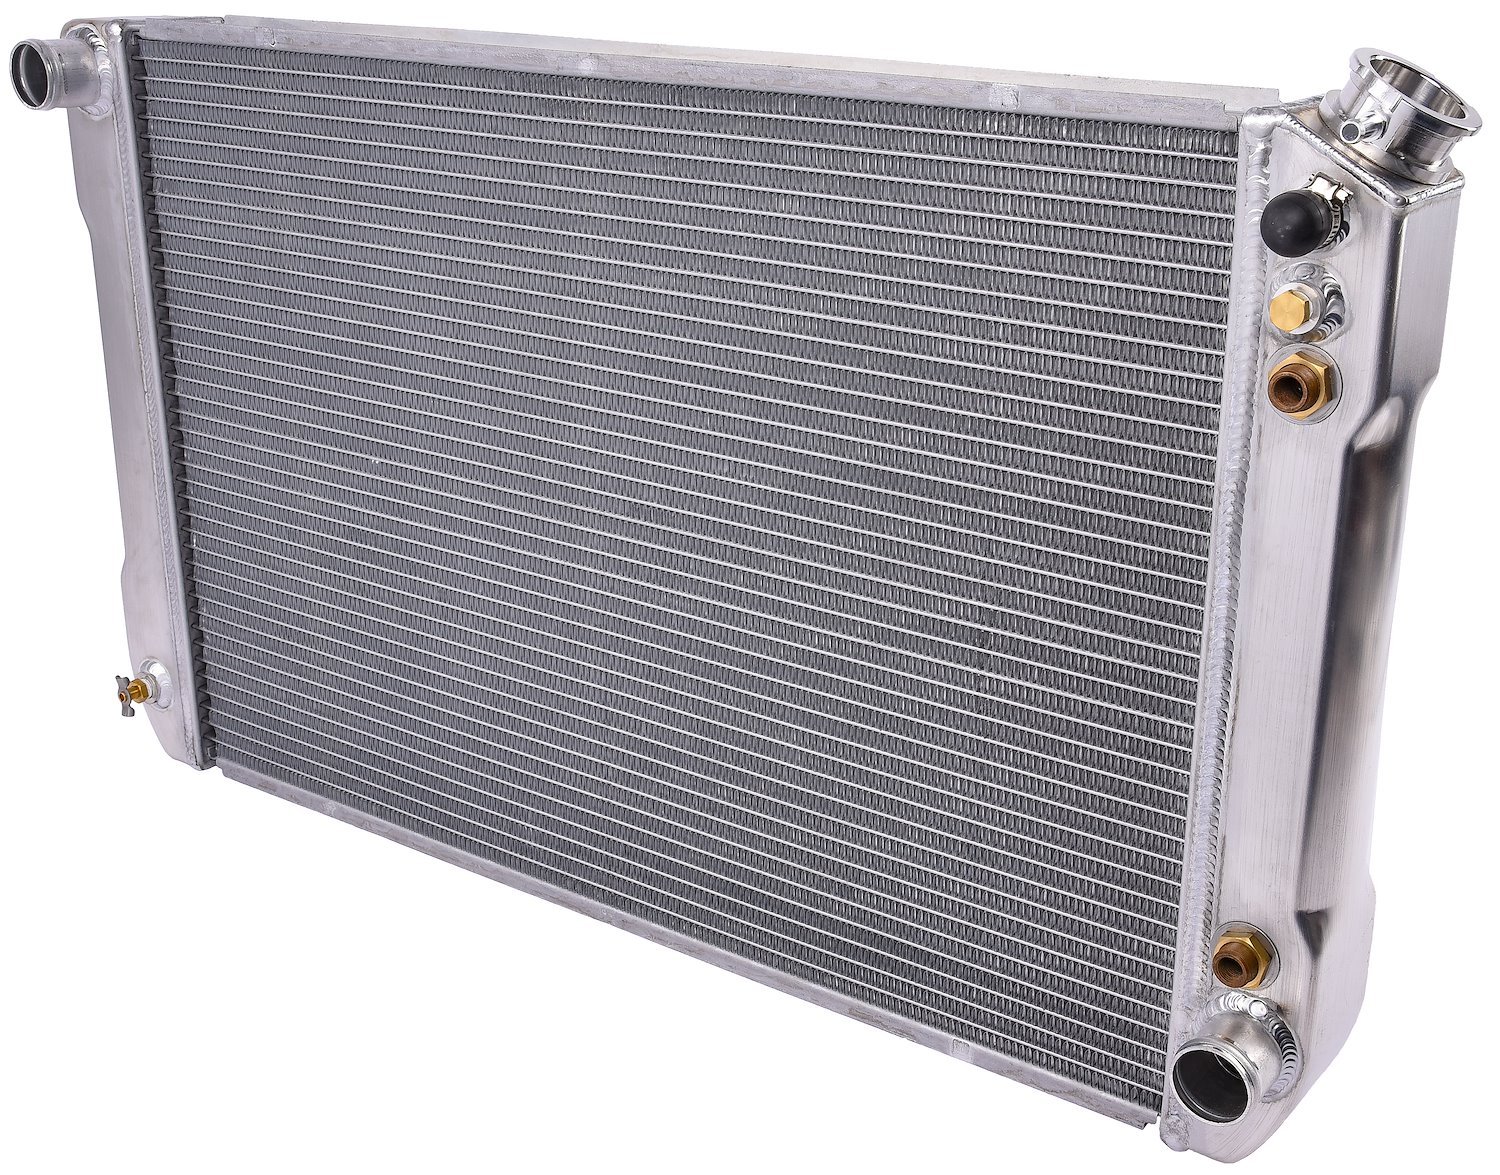 Ready Fit Aluminum Radiator Fits Select 1968-1981 GM Passenger Cars [Small Block Chevy, Automatic Transmission]